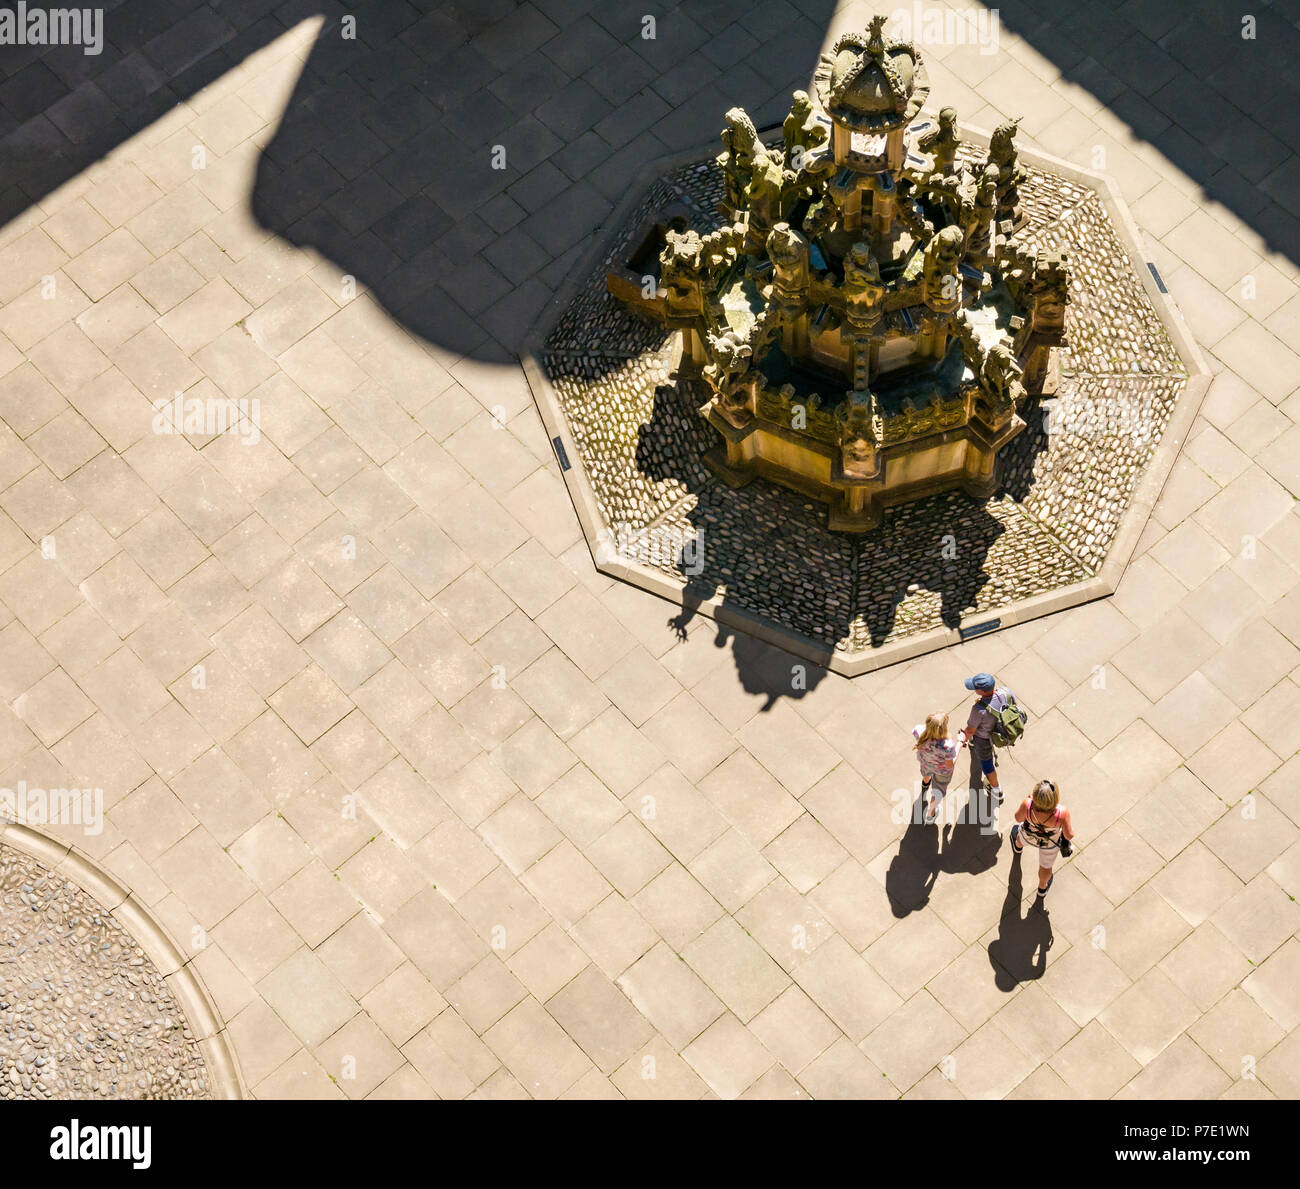 Looking down to central courtyard with ornate stone fountain with people’s shadows in Summer sunshine, Linlithgow Palace, West Lothian, Scotland, UK Stock Photo